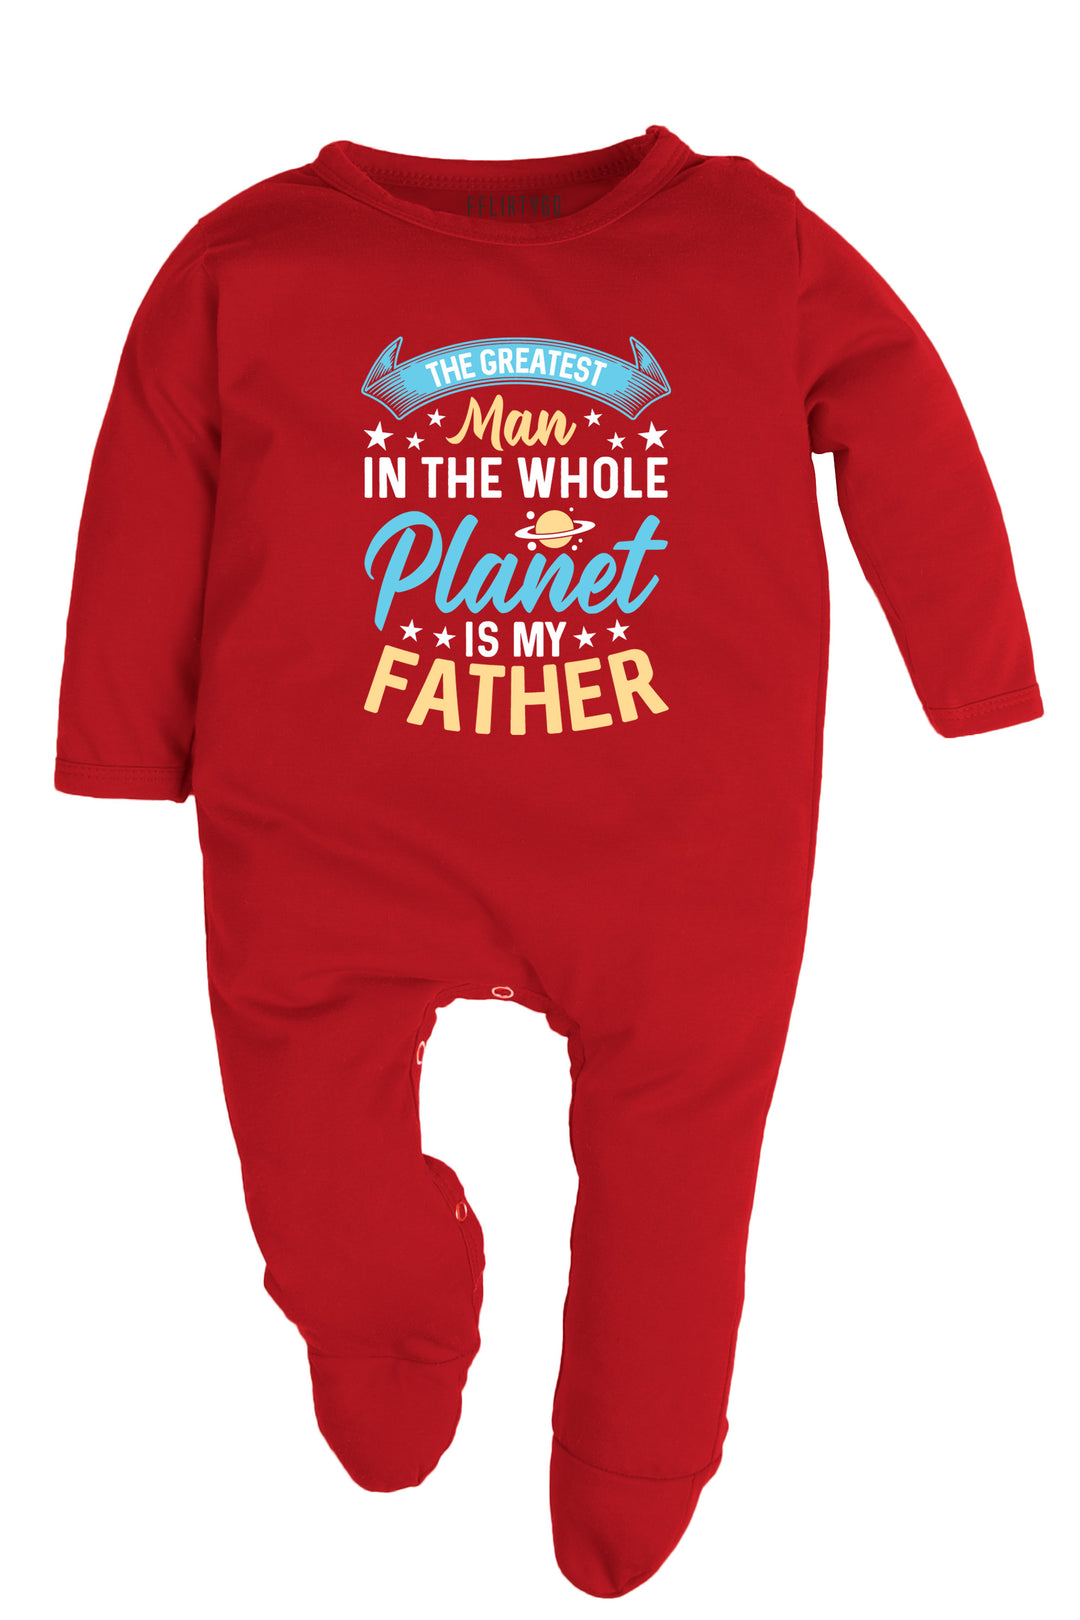 The Greatest Man In The Whole Planet Is My Father Baby Romper | Onesies